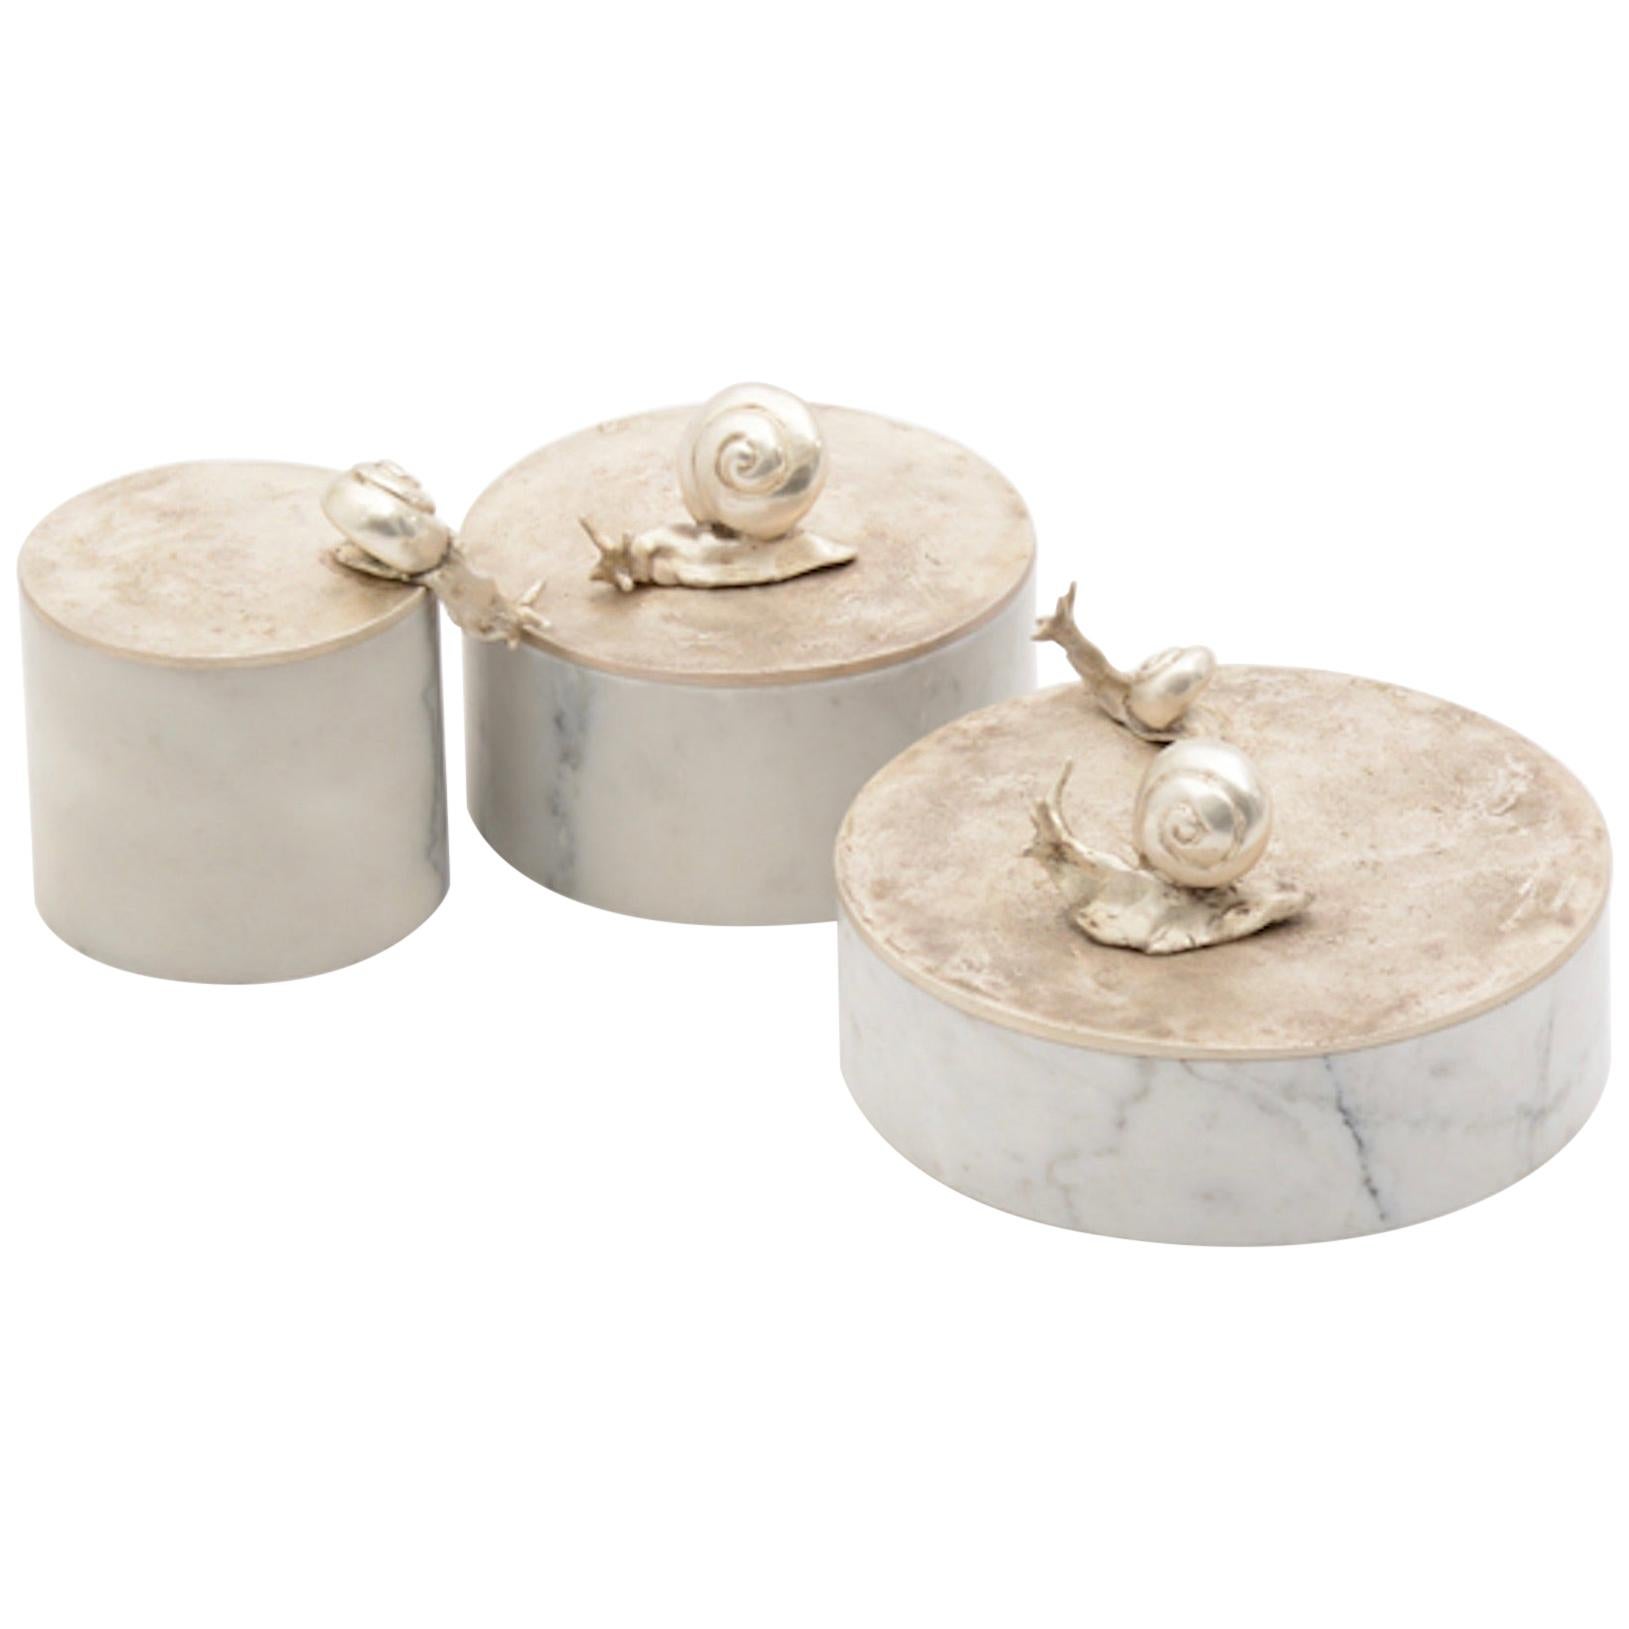 Small Caracol Keepsake Box in Silver Bronze and White Marble from Elan Atelier